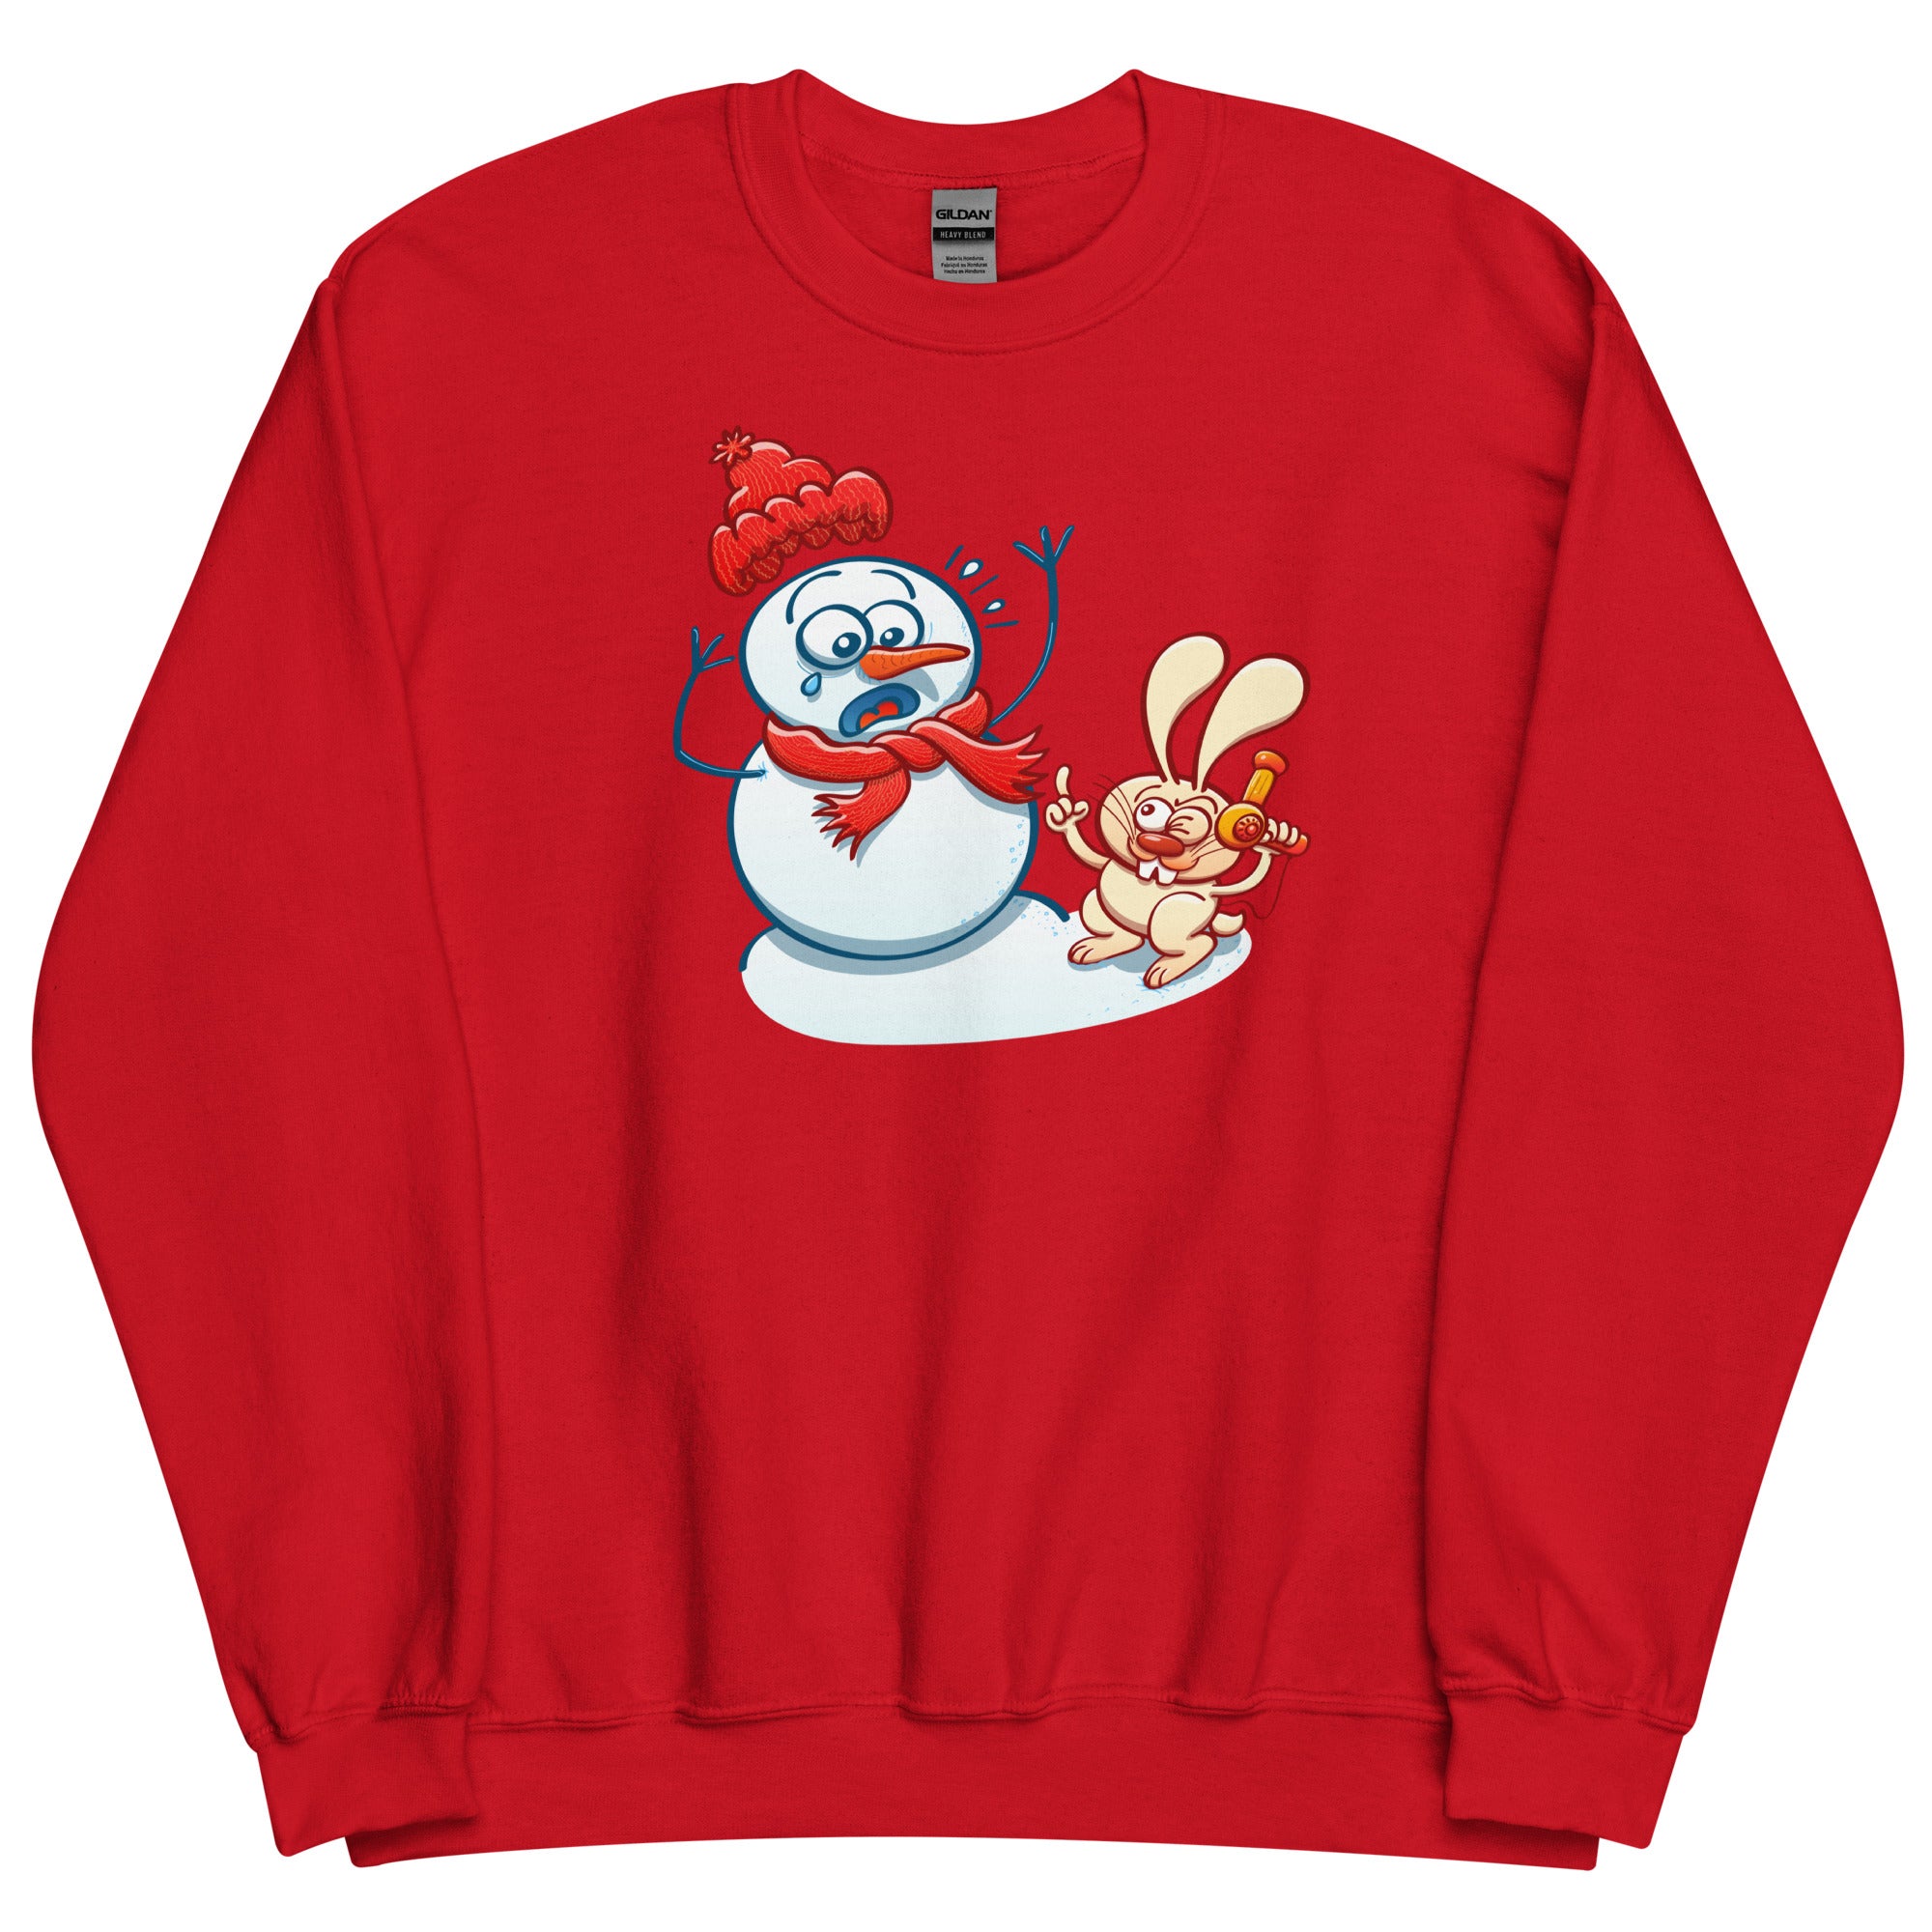 Bunny Stealing a Snowman's Nose with a Blow Dryer - Unisex Sweatshirt